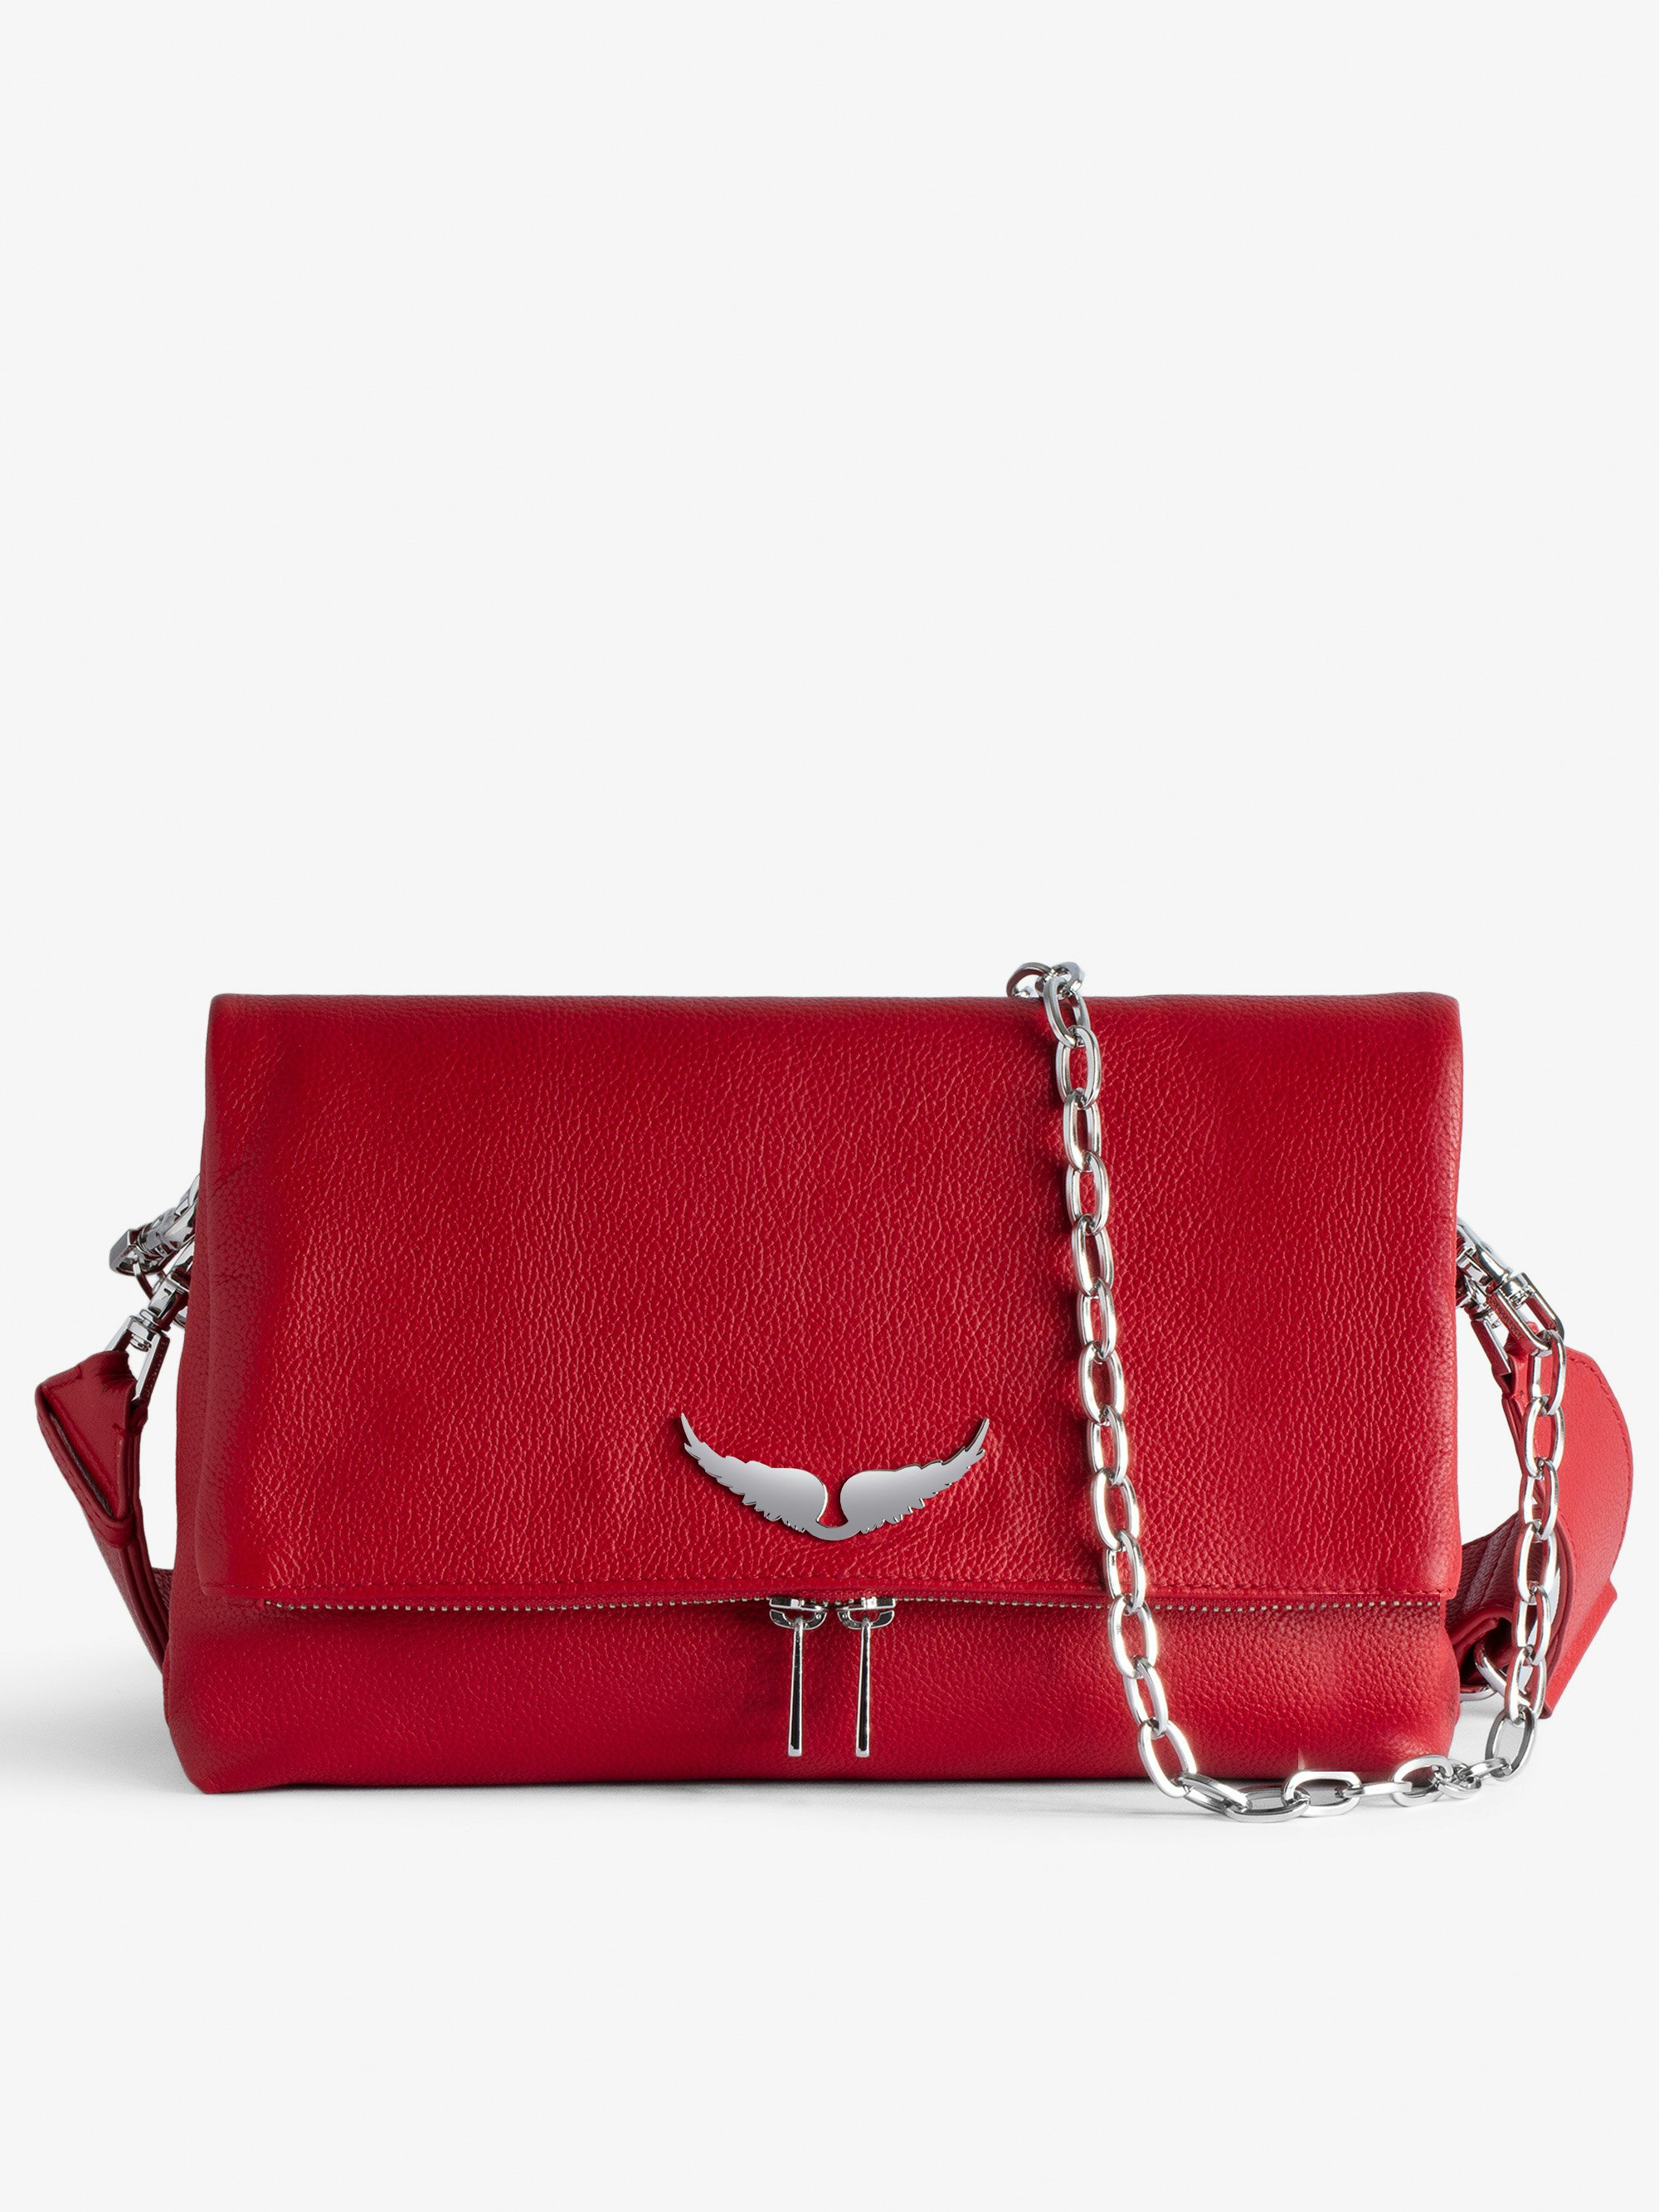 Rocky Bag - Women’s red grained leather bag with shoulder strap and wings charm